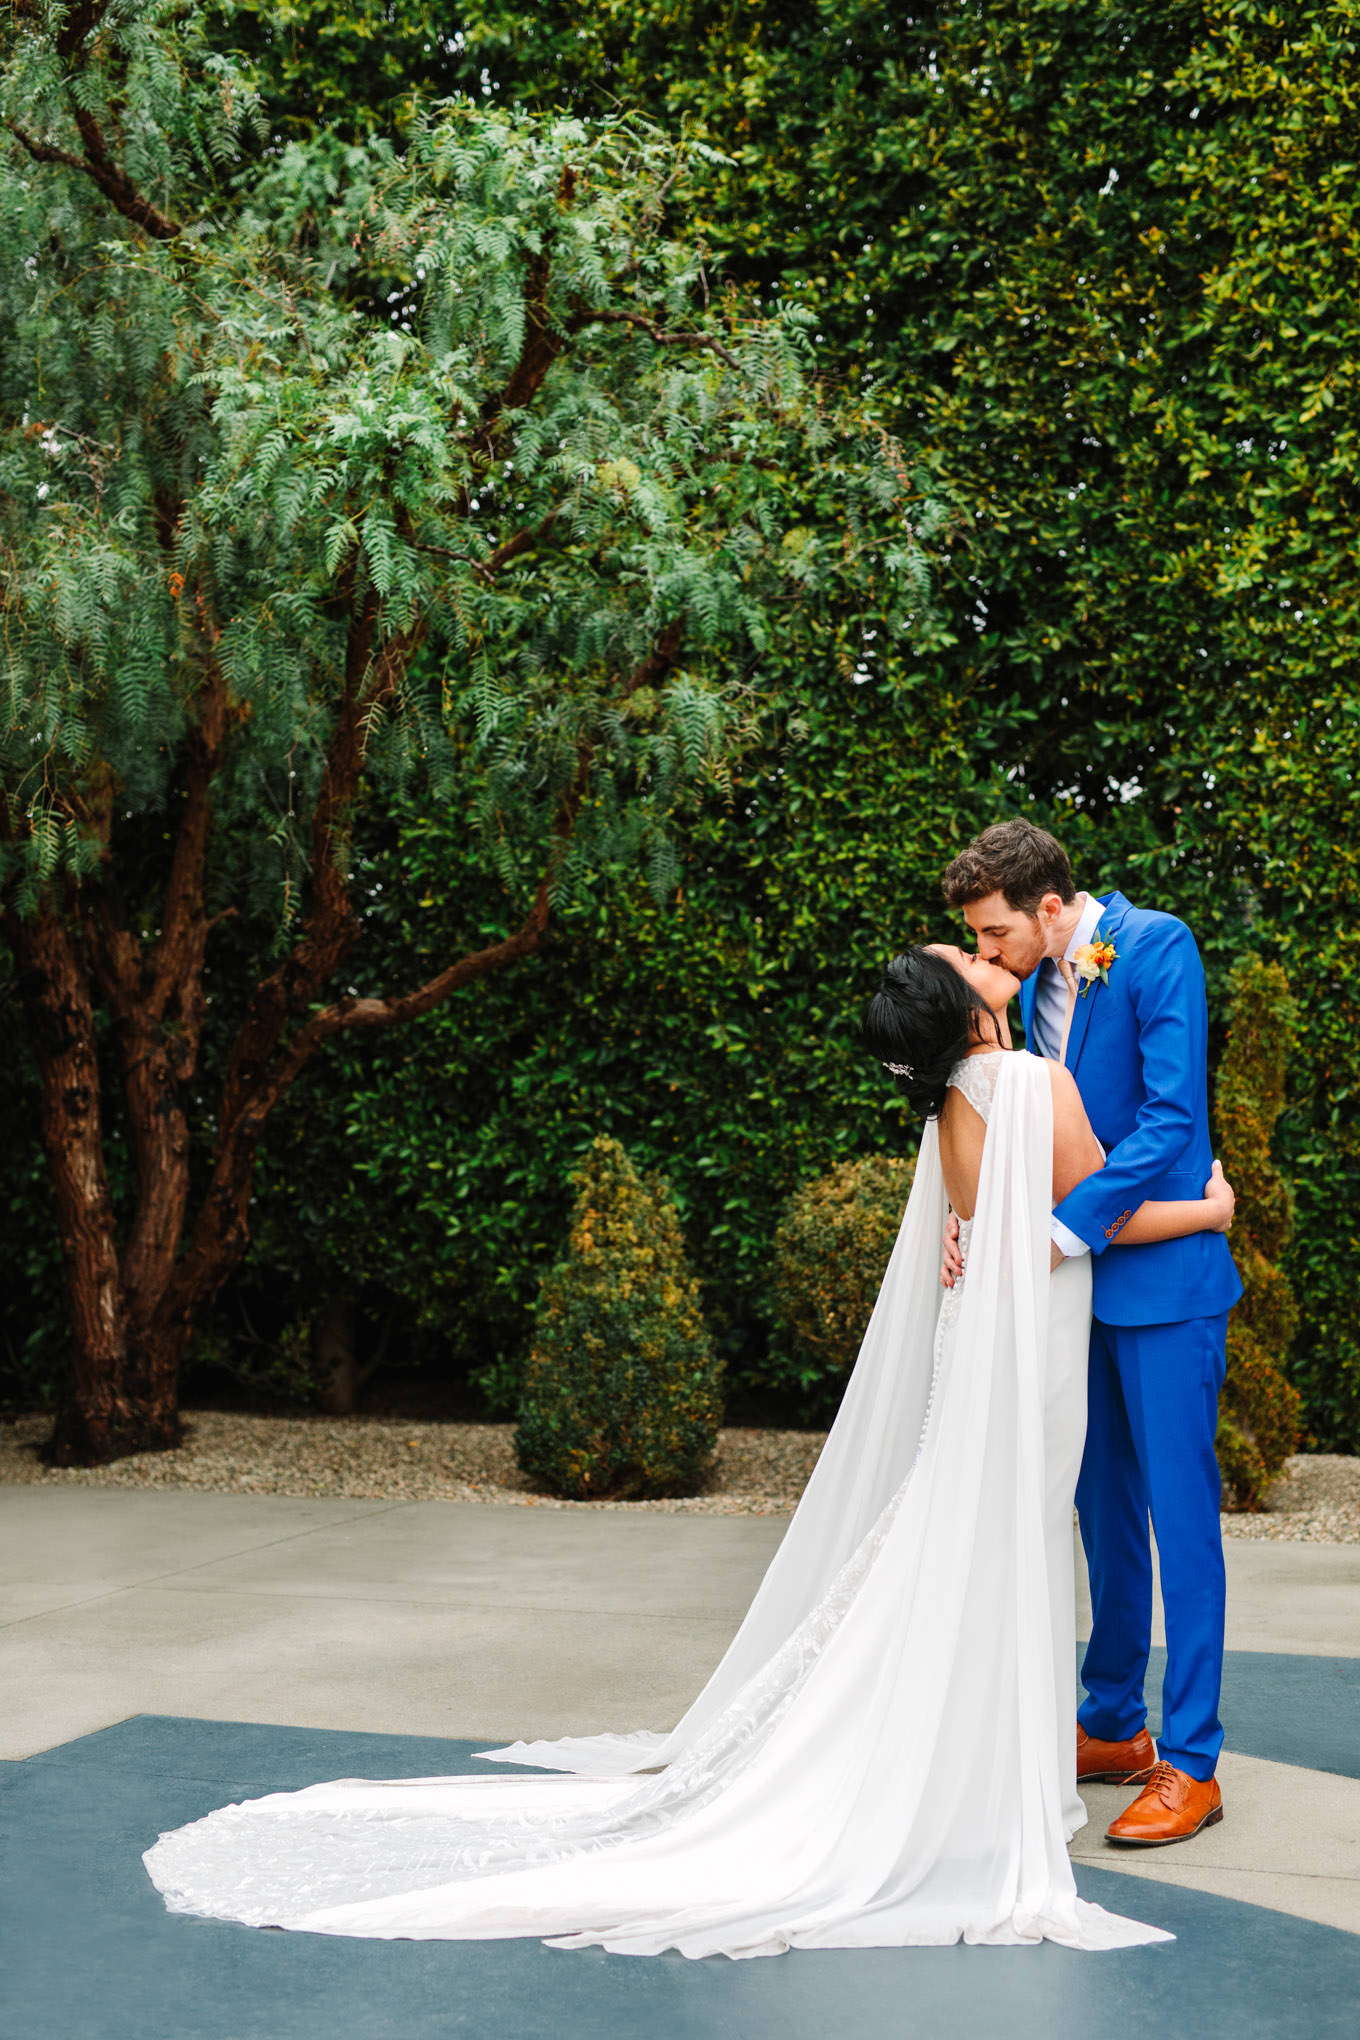 Bride in cape dress kissing | TV inspired wedding at The Fig House Los Angeles | Published on The Knot | Fresh and colorful photography for fun-loving couples in Southern California | #losangeleswedding #TVwedding #colorfulwedding #theknot   Source: Mary Costa Photography | Los Angeles wedding photographer